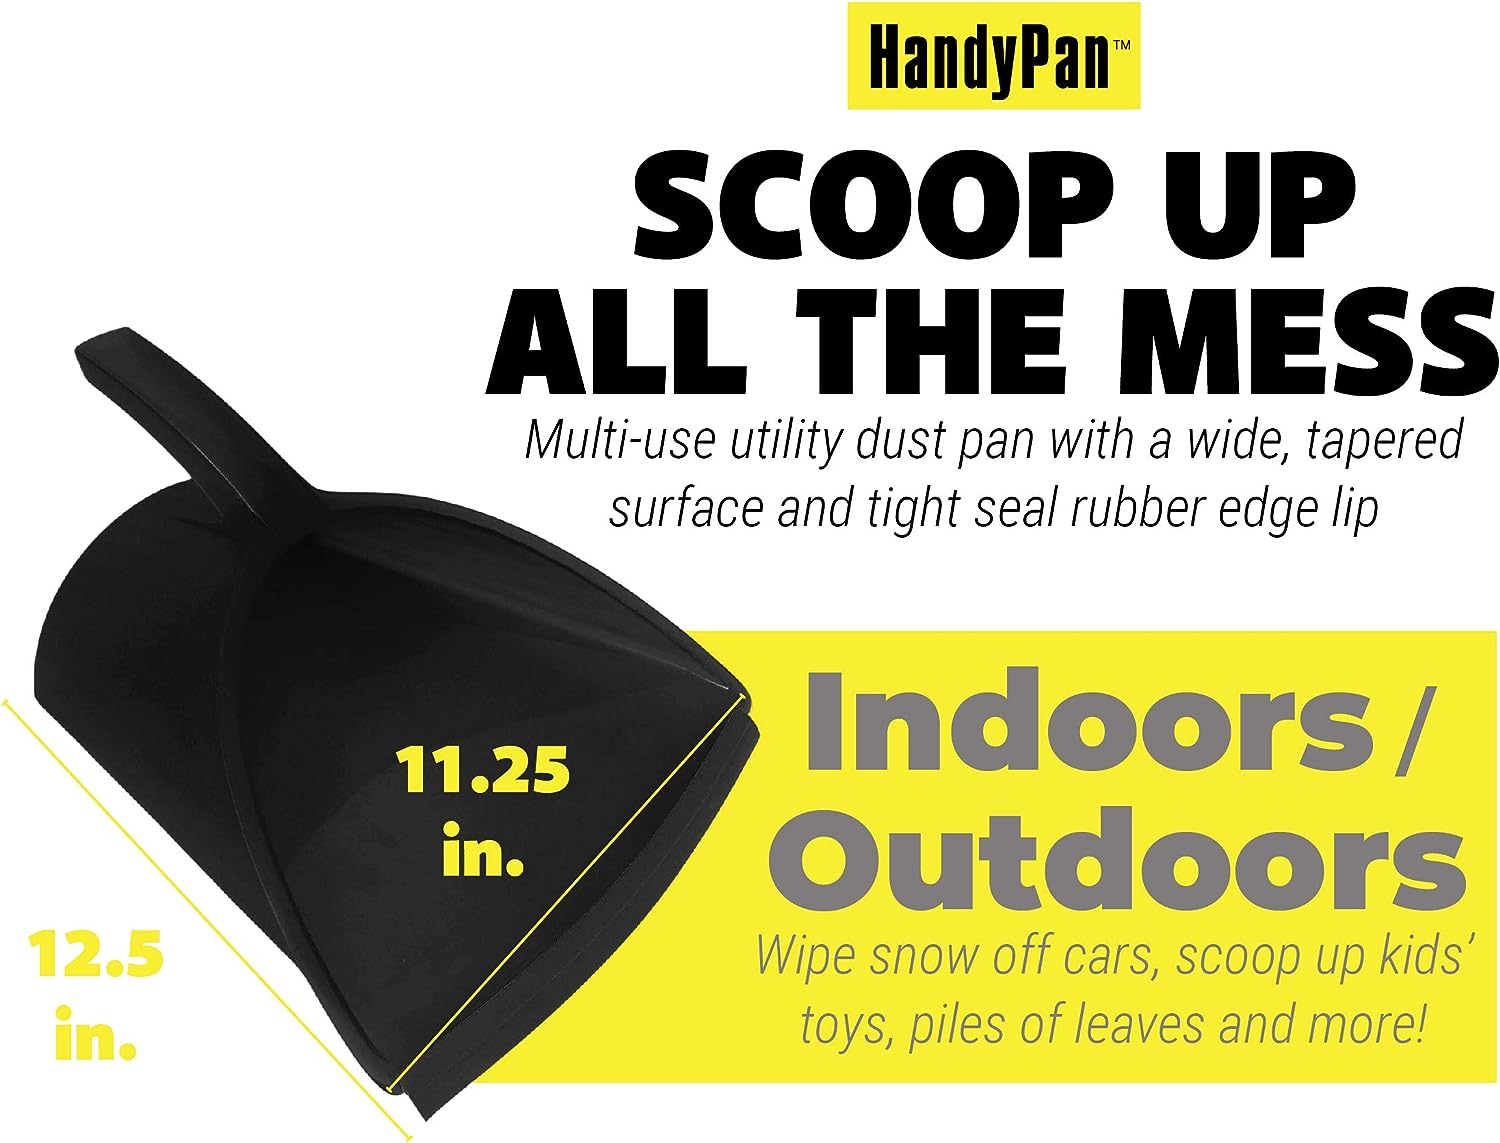 Handy Pan - Recycled Black Plastic - Large Capacity Heavy Duty Dust Pan! Made in USA! Great for Home, Shop, Garage, Waterproof, Stackable, Stands Up.